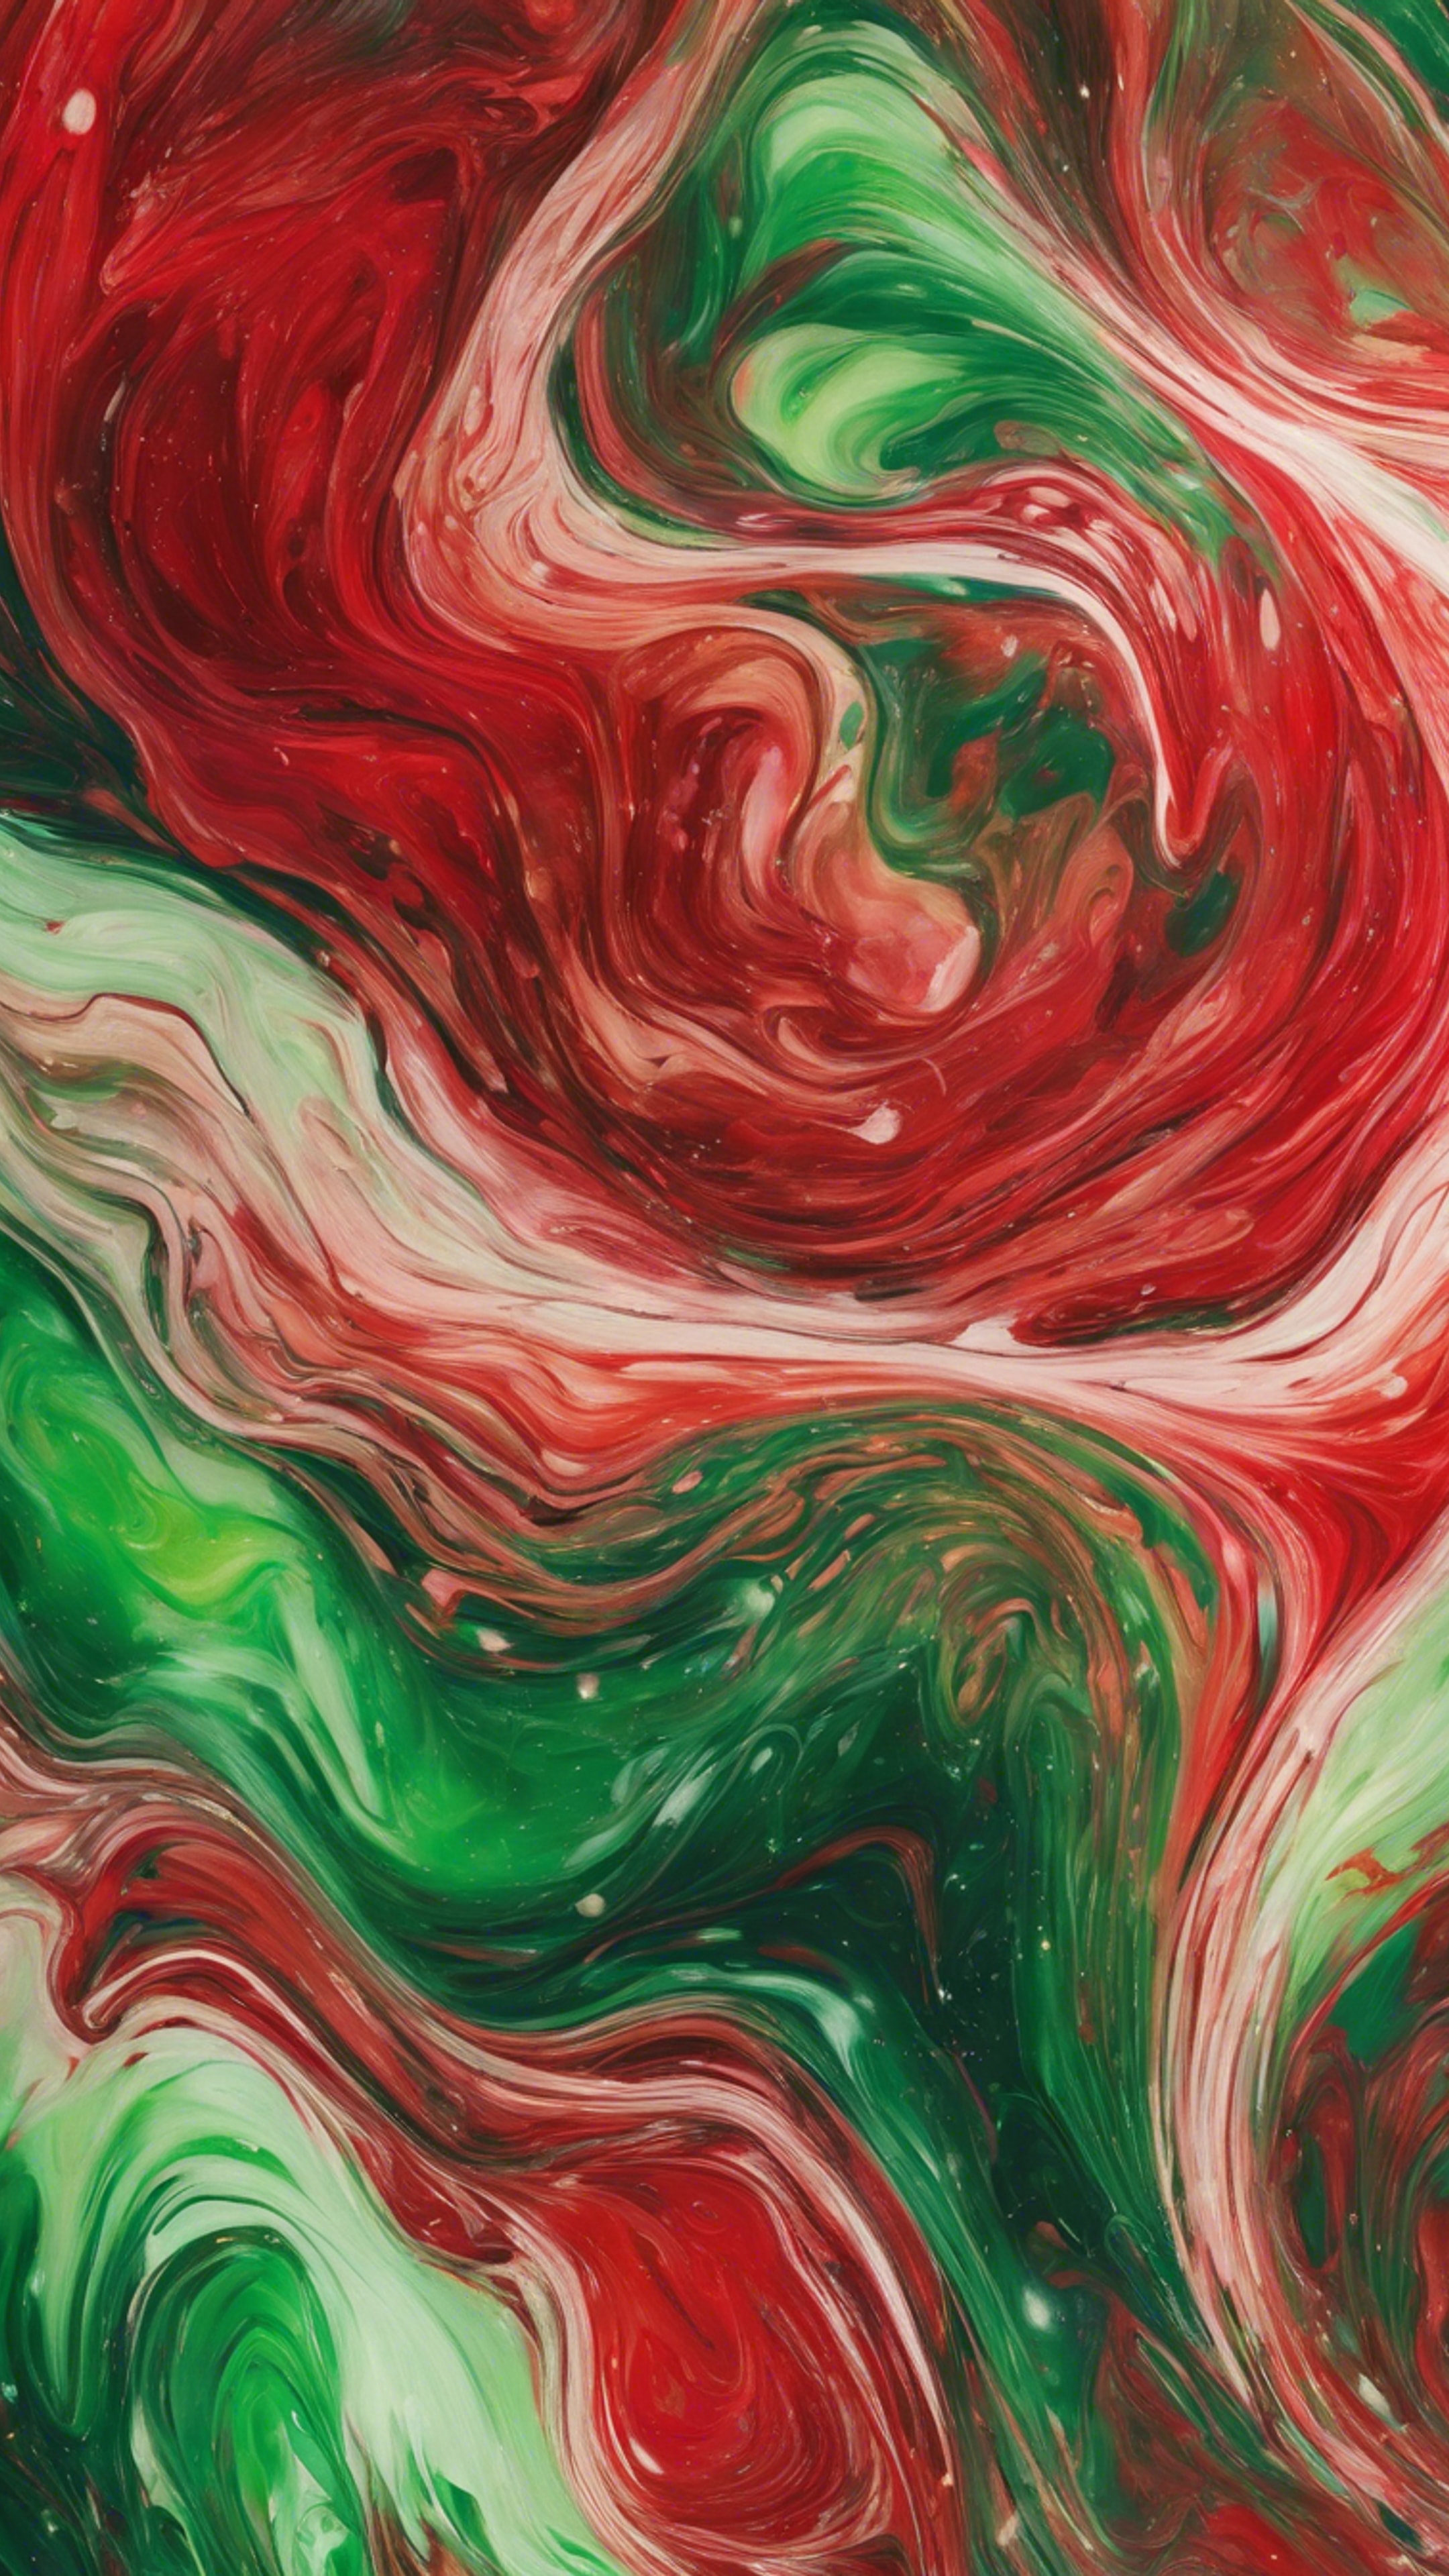 A vivid painting of swirling red and green abstract patterns Tapetai[5978fc4bccef4bcc8a58]